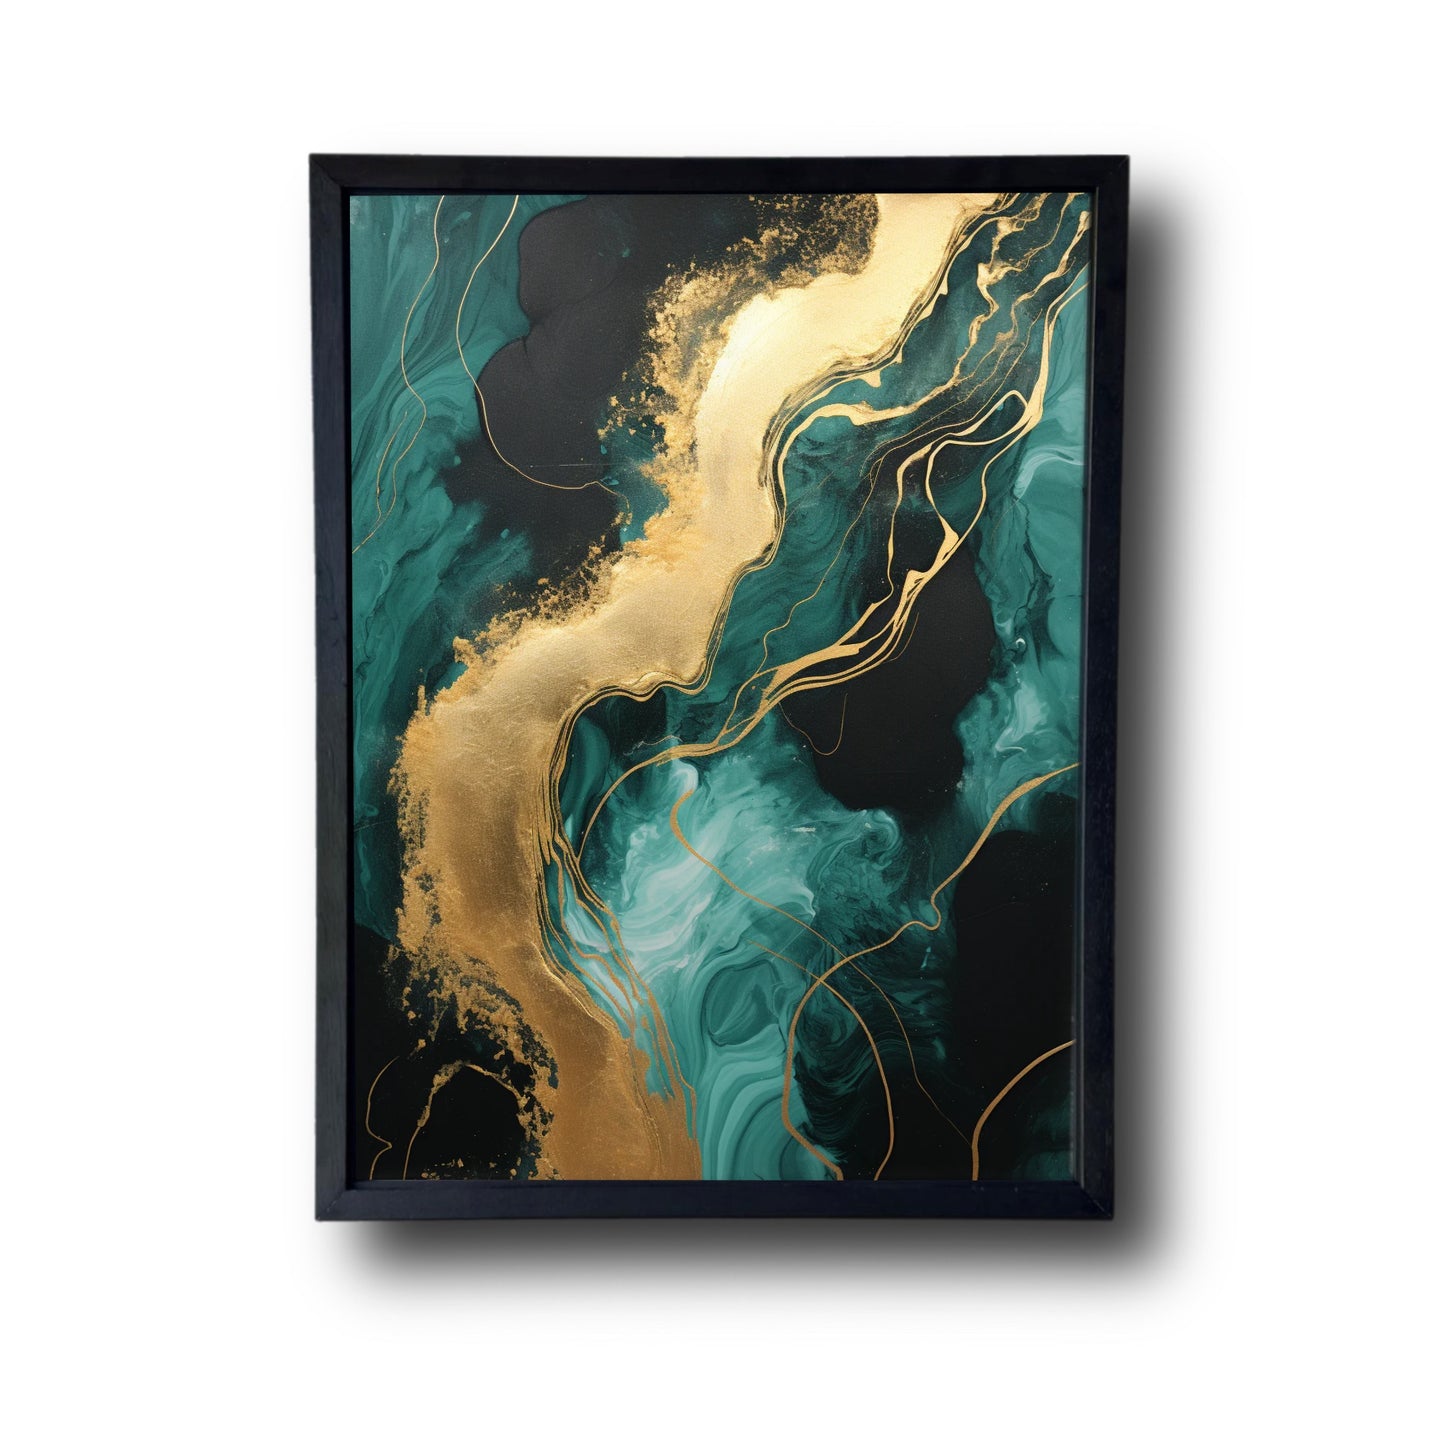 Abstract Golden And Swirls Green Painting 3.0